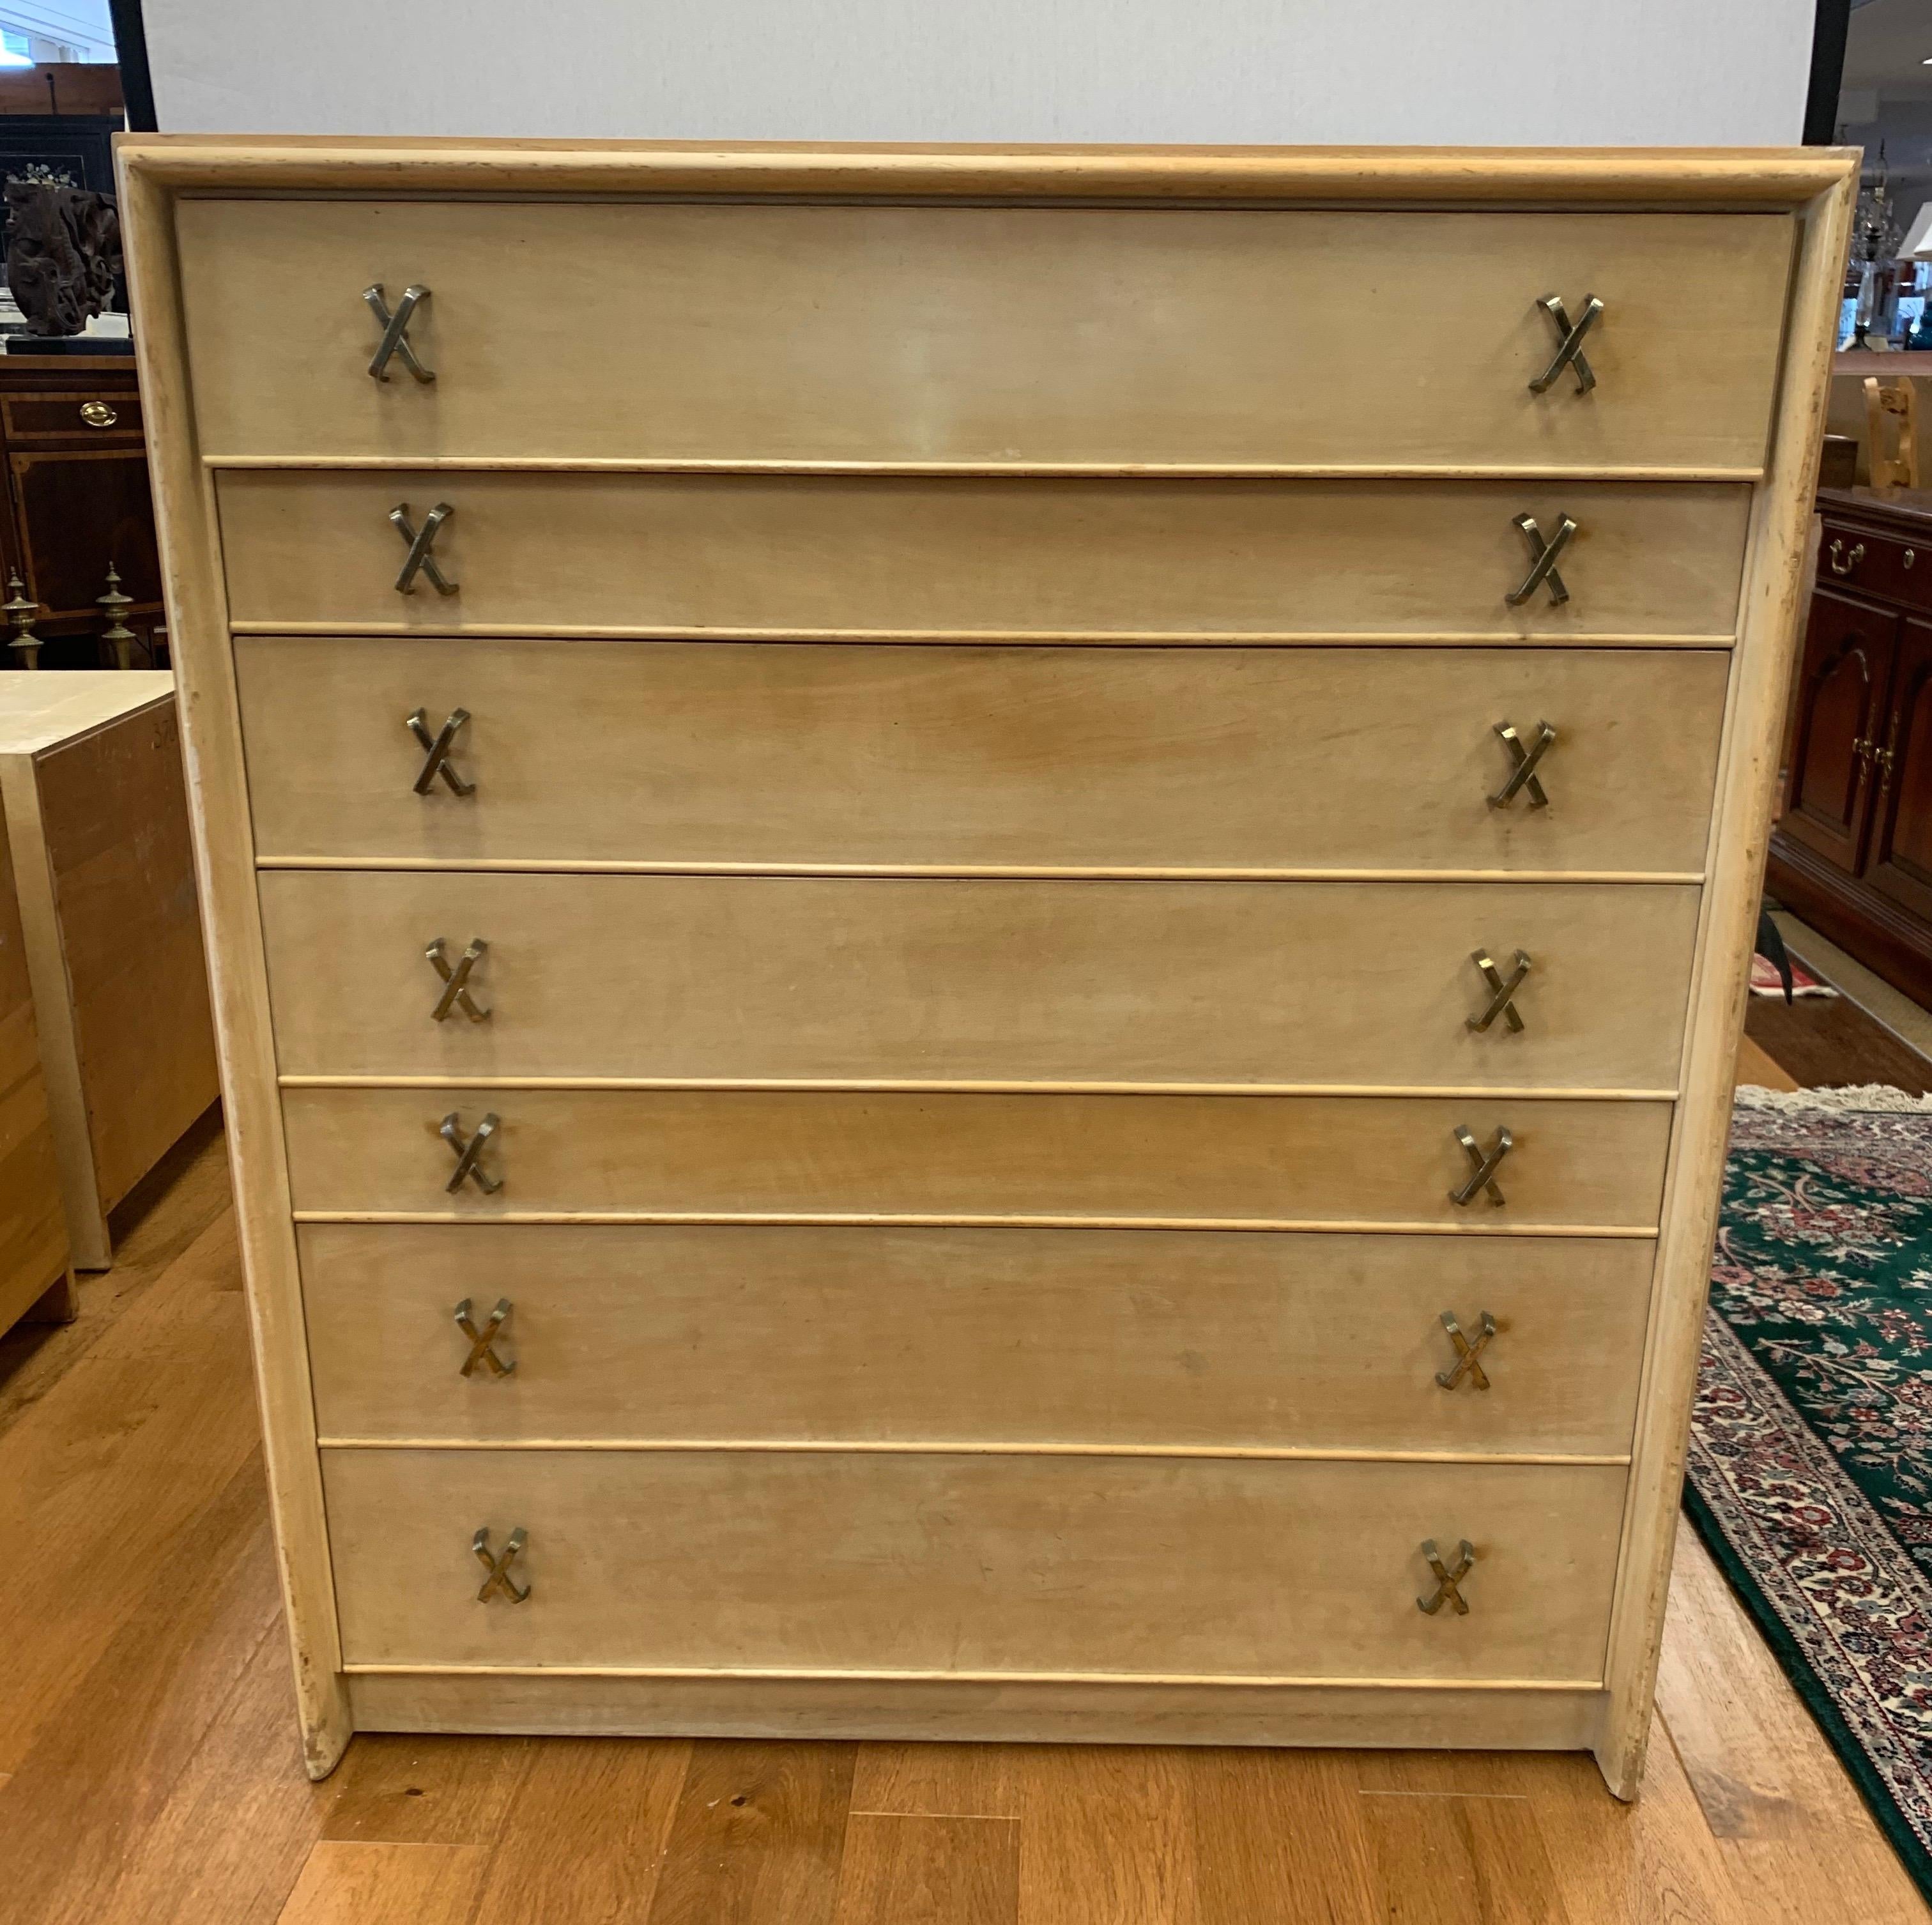 This sophisticated high chest was designed by Paul Frankl for the Johnson Furniture Company, circa late 1940s-early 1950s. The coveted Johnson hallmark is incised inside. The piece, which is one of two we are selling this week, is a prime example of